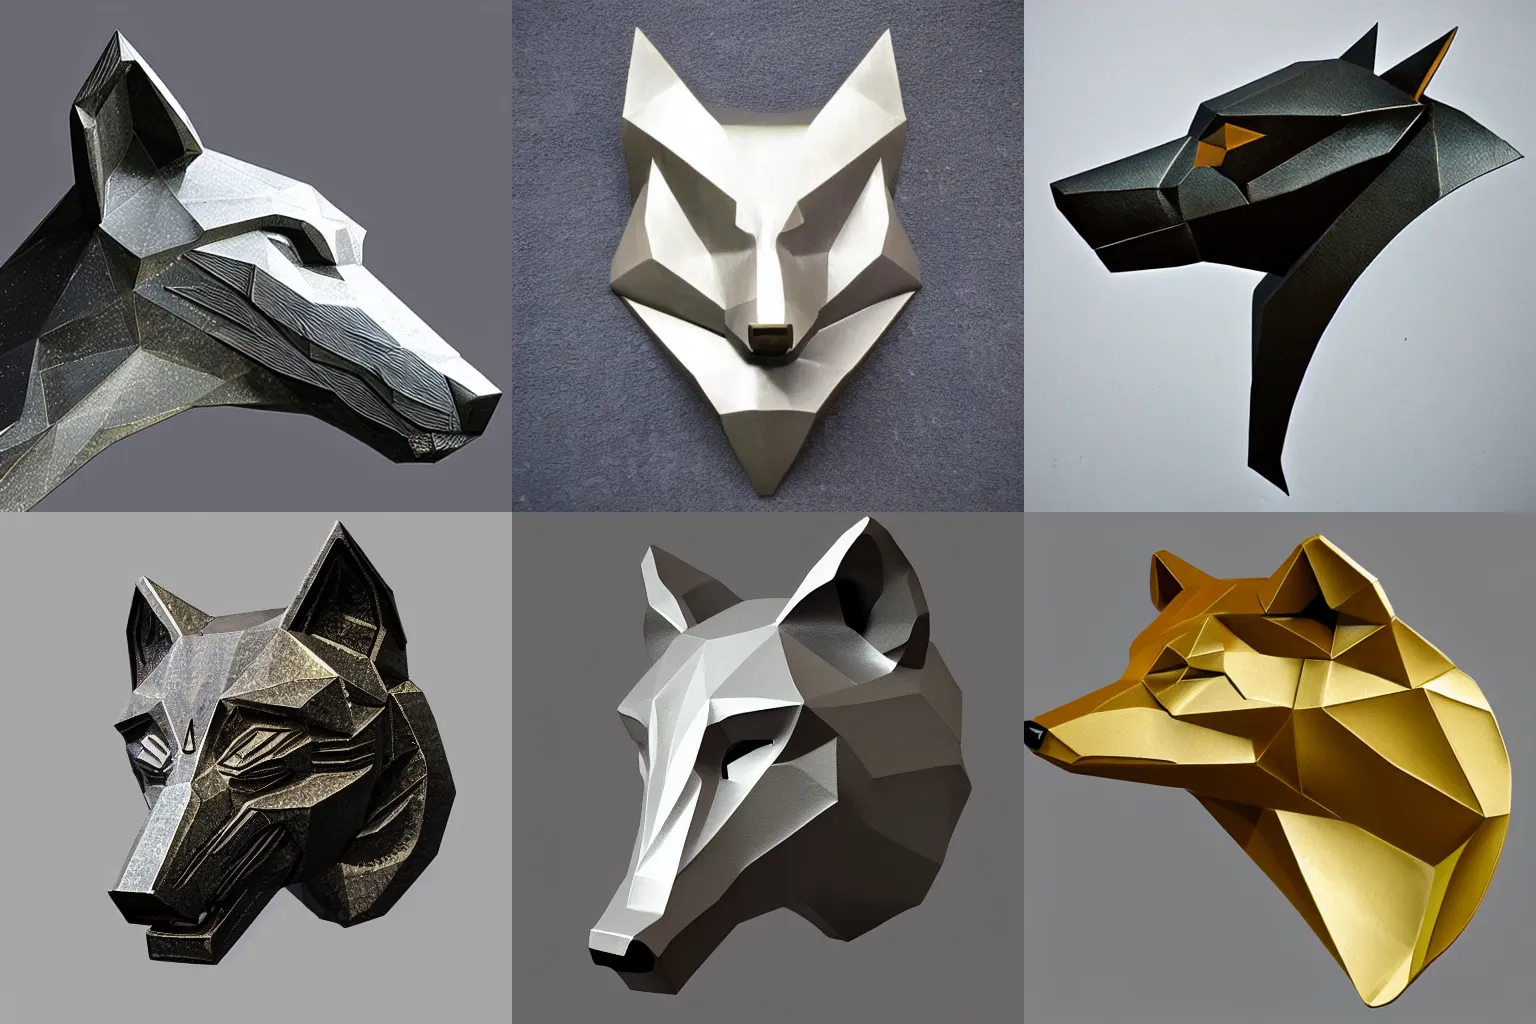 Low poly Art Deco metal sculpture of a wolf head, flat